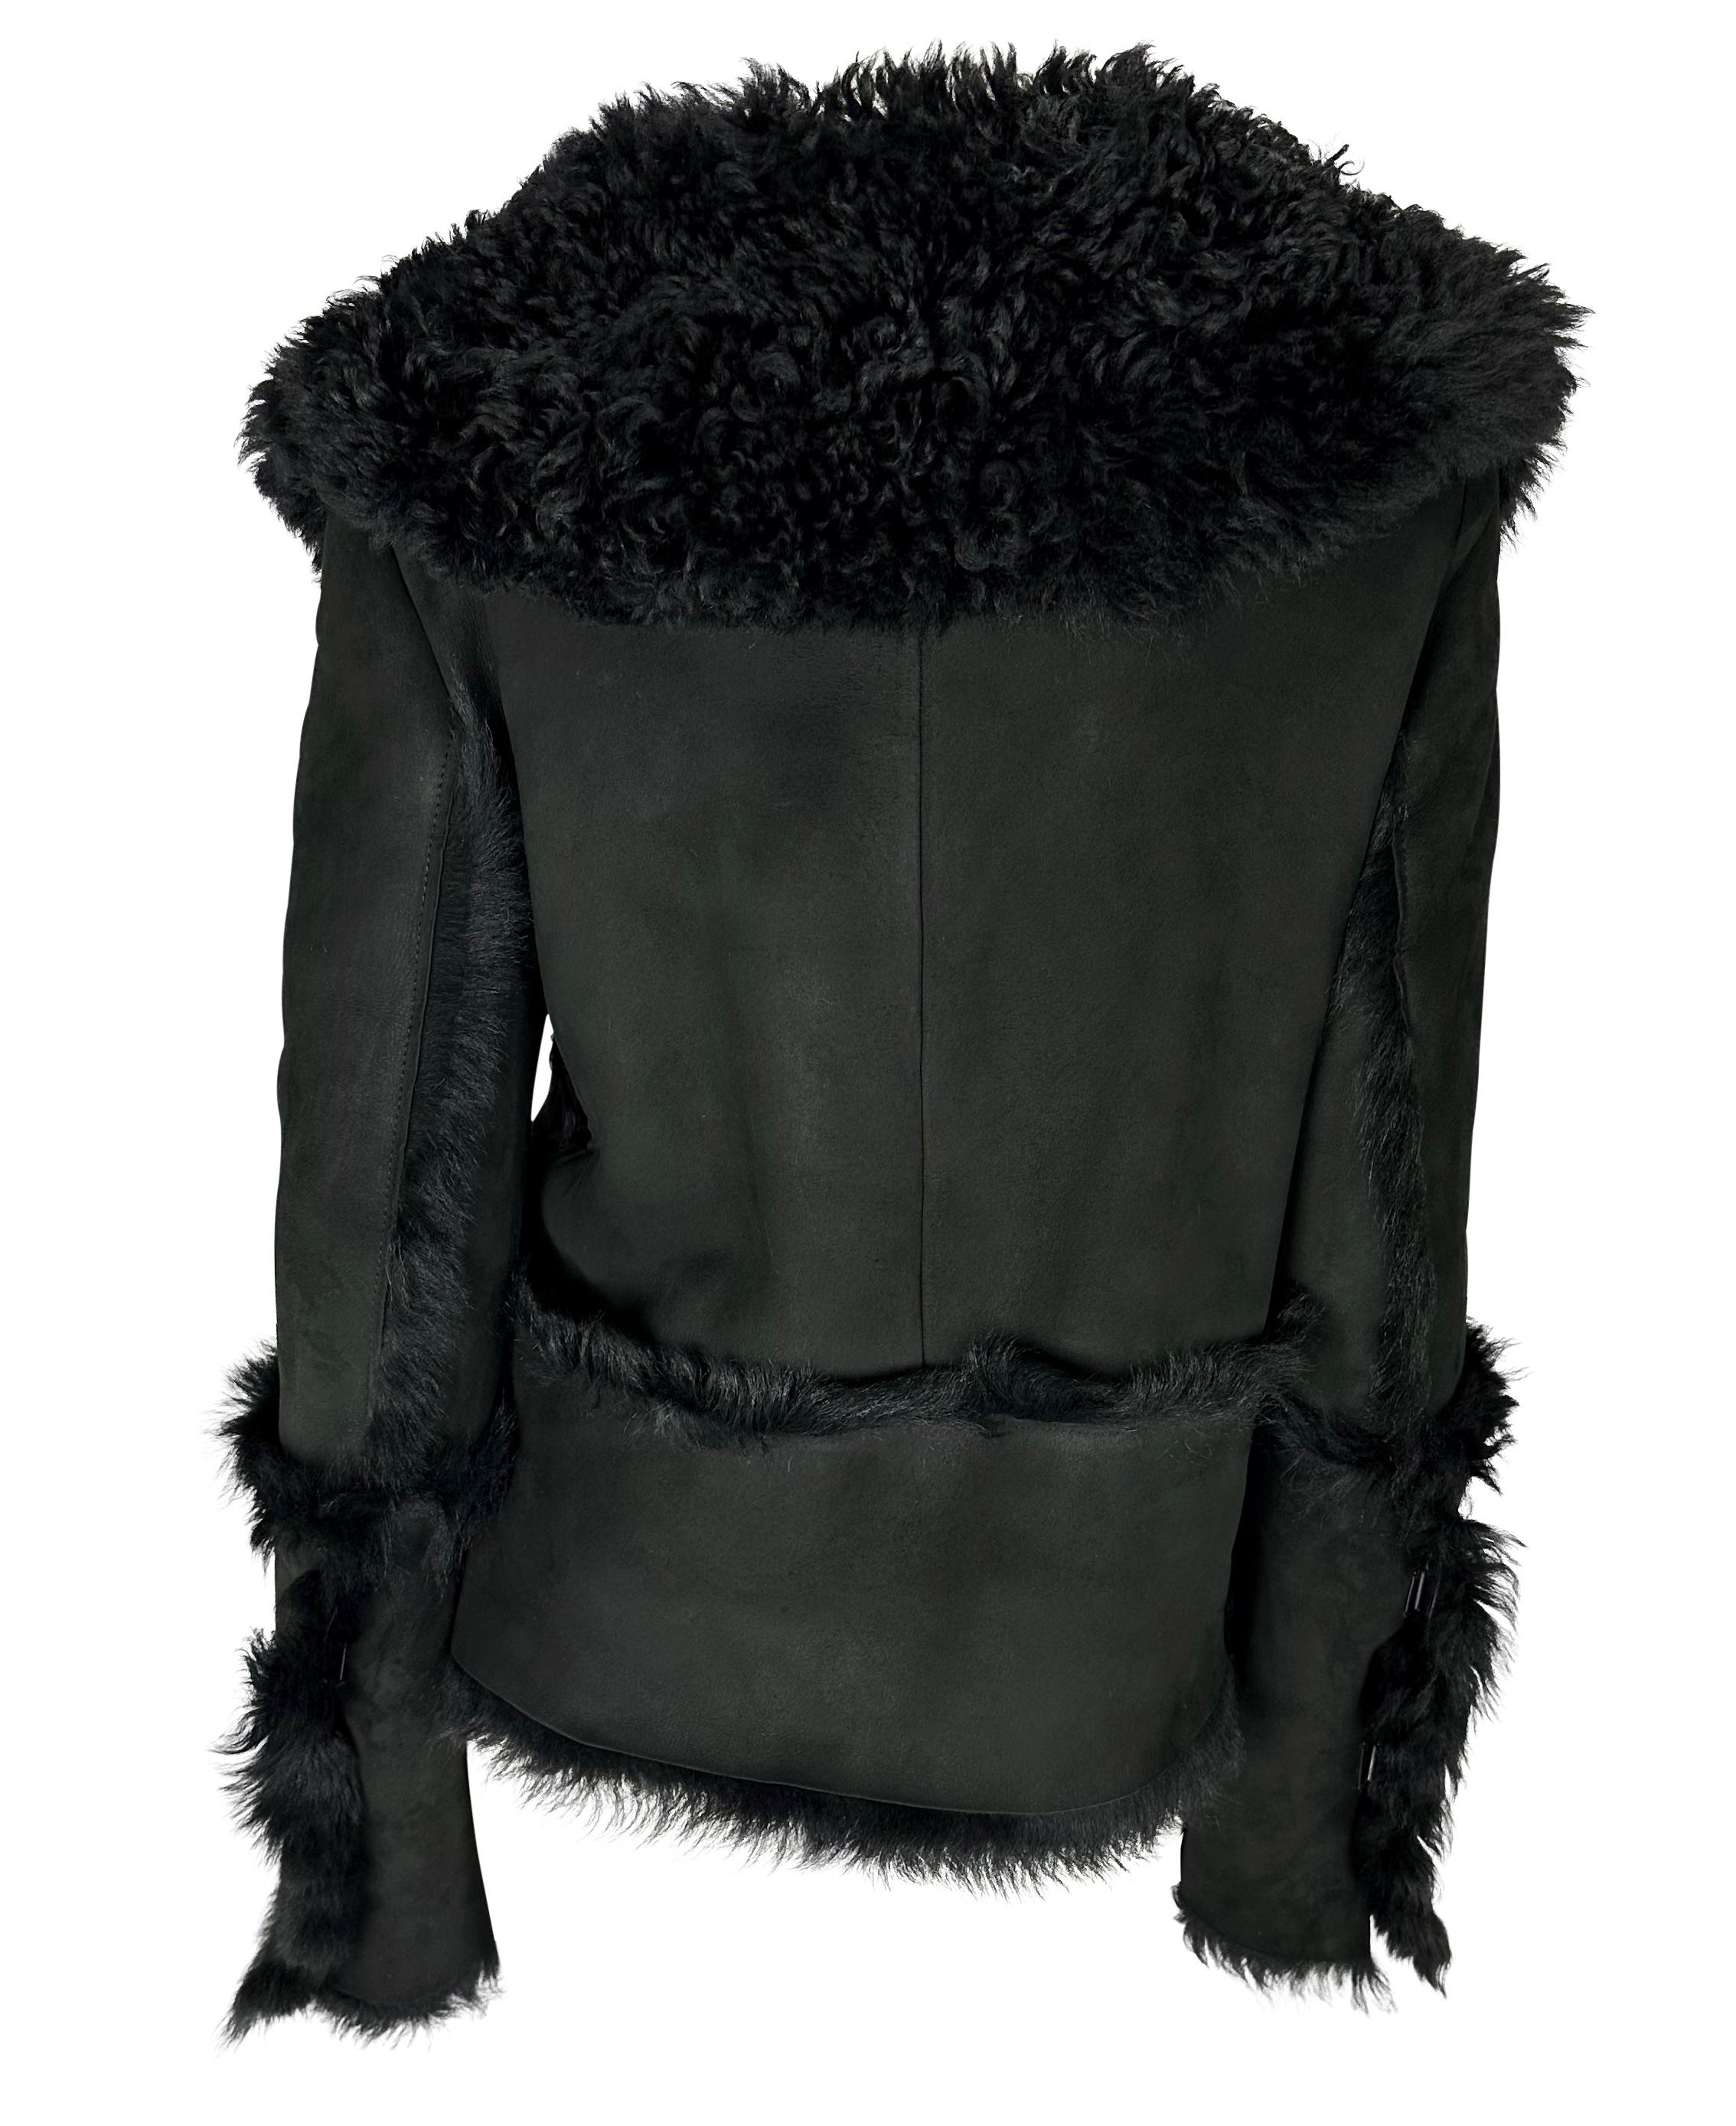 Early 2000s Gucci by Tom Ford Black Shearling Suede Oversized Moto